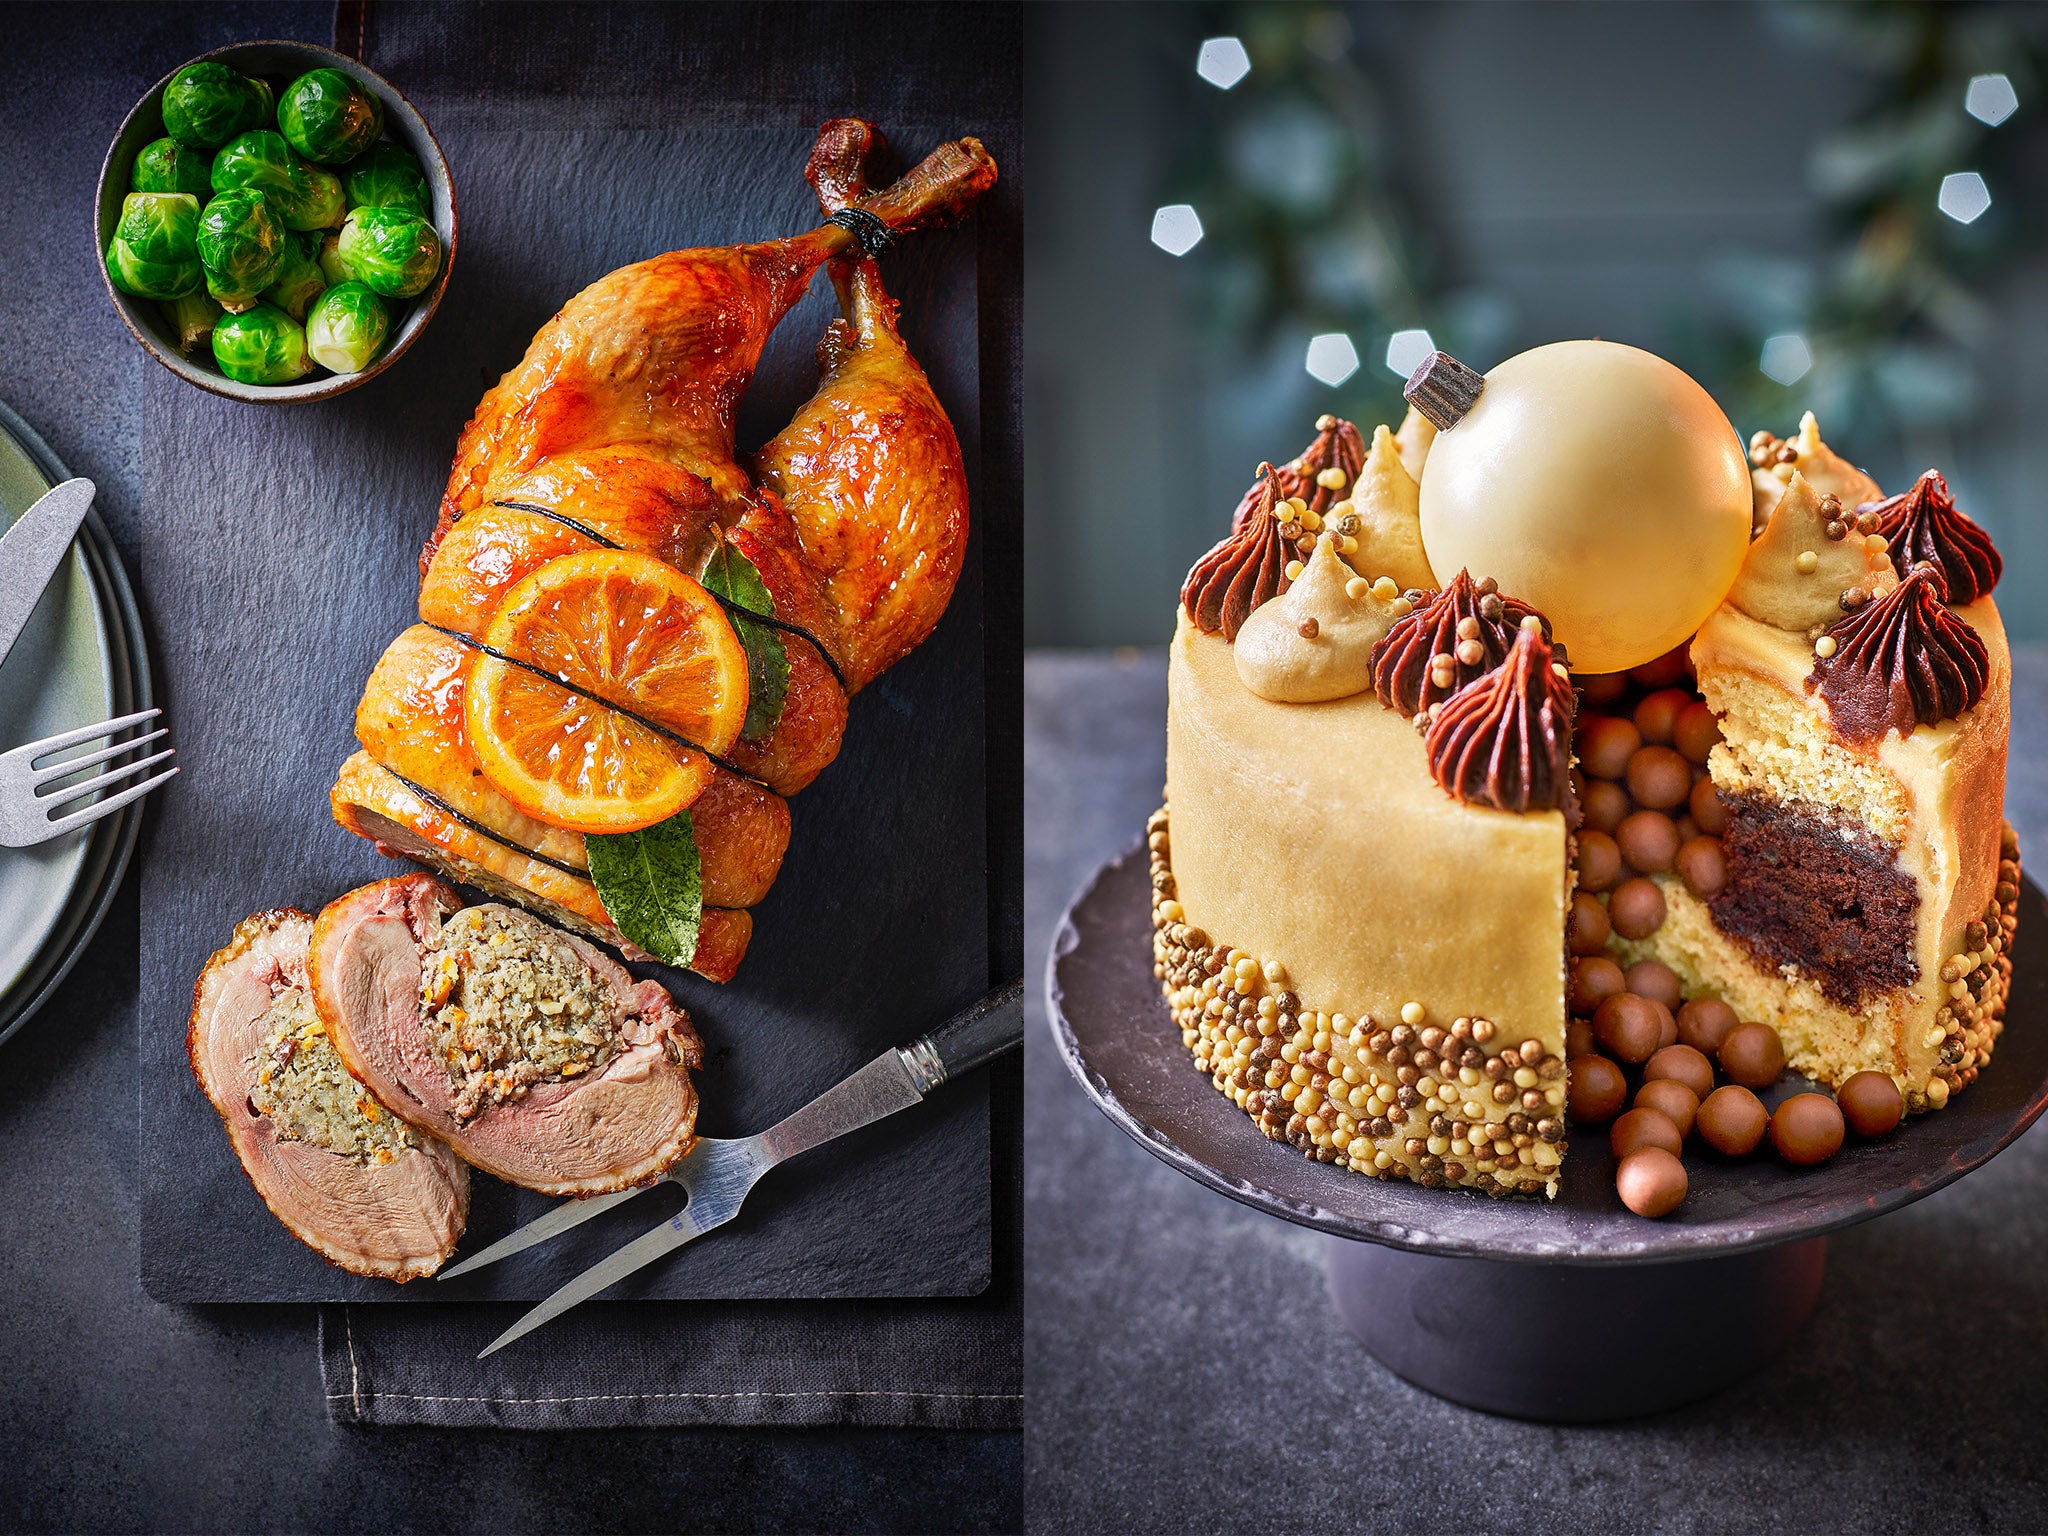 The range is full of impressive desserts and flavoursome meats that are really affordable